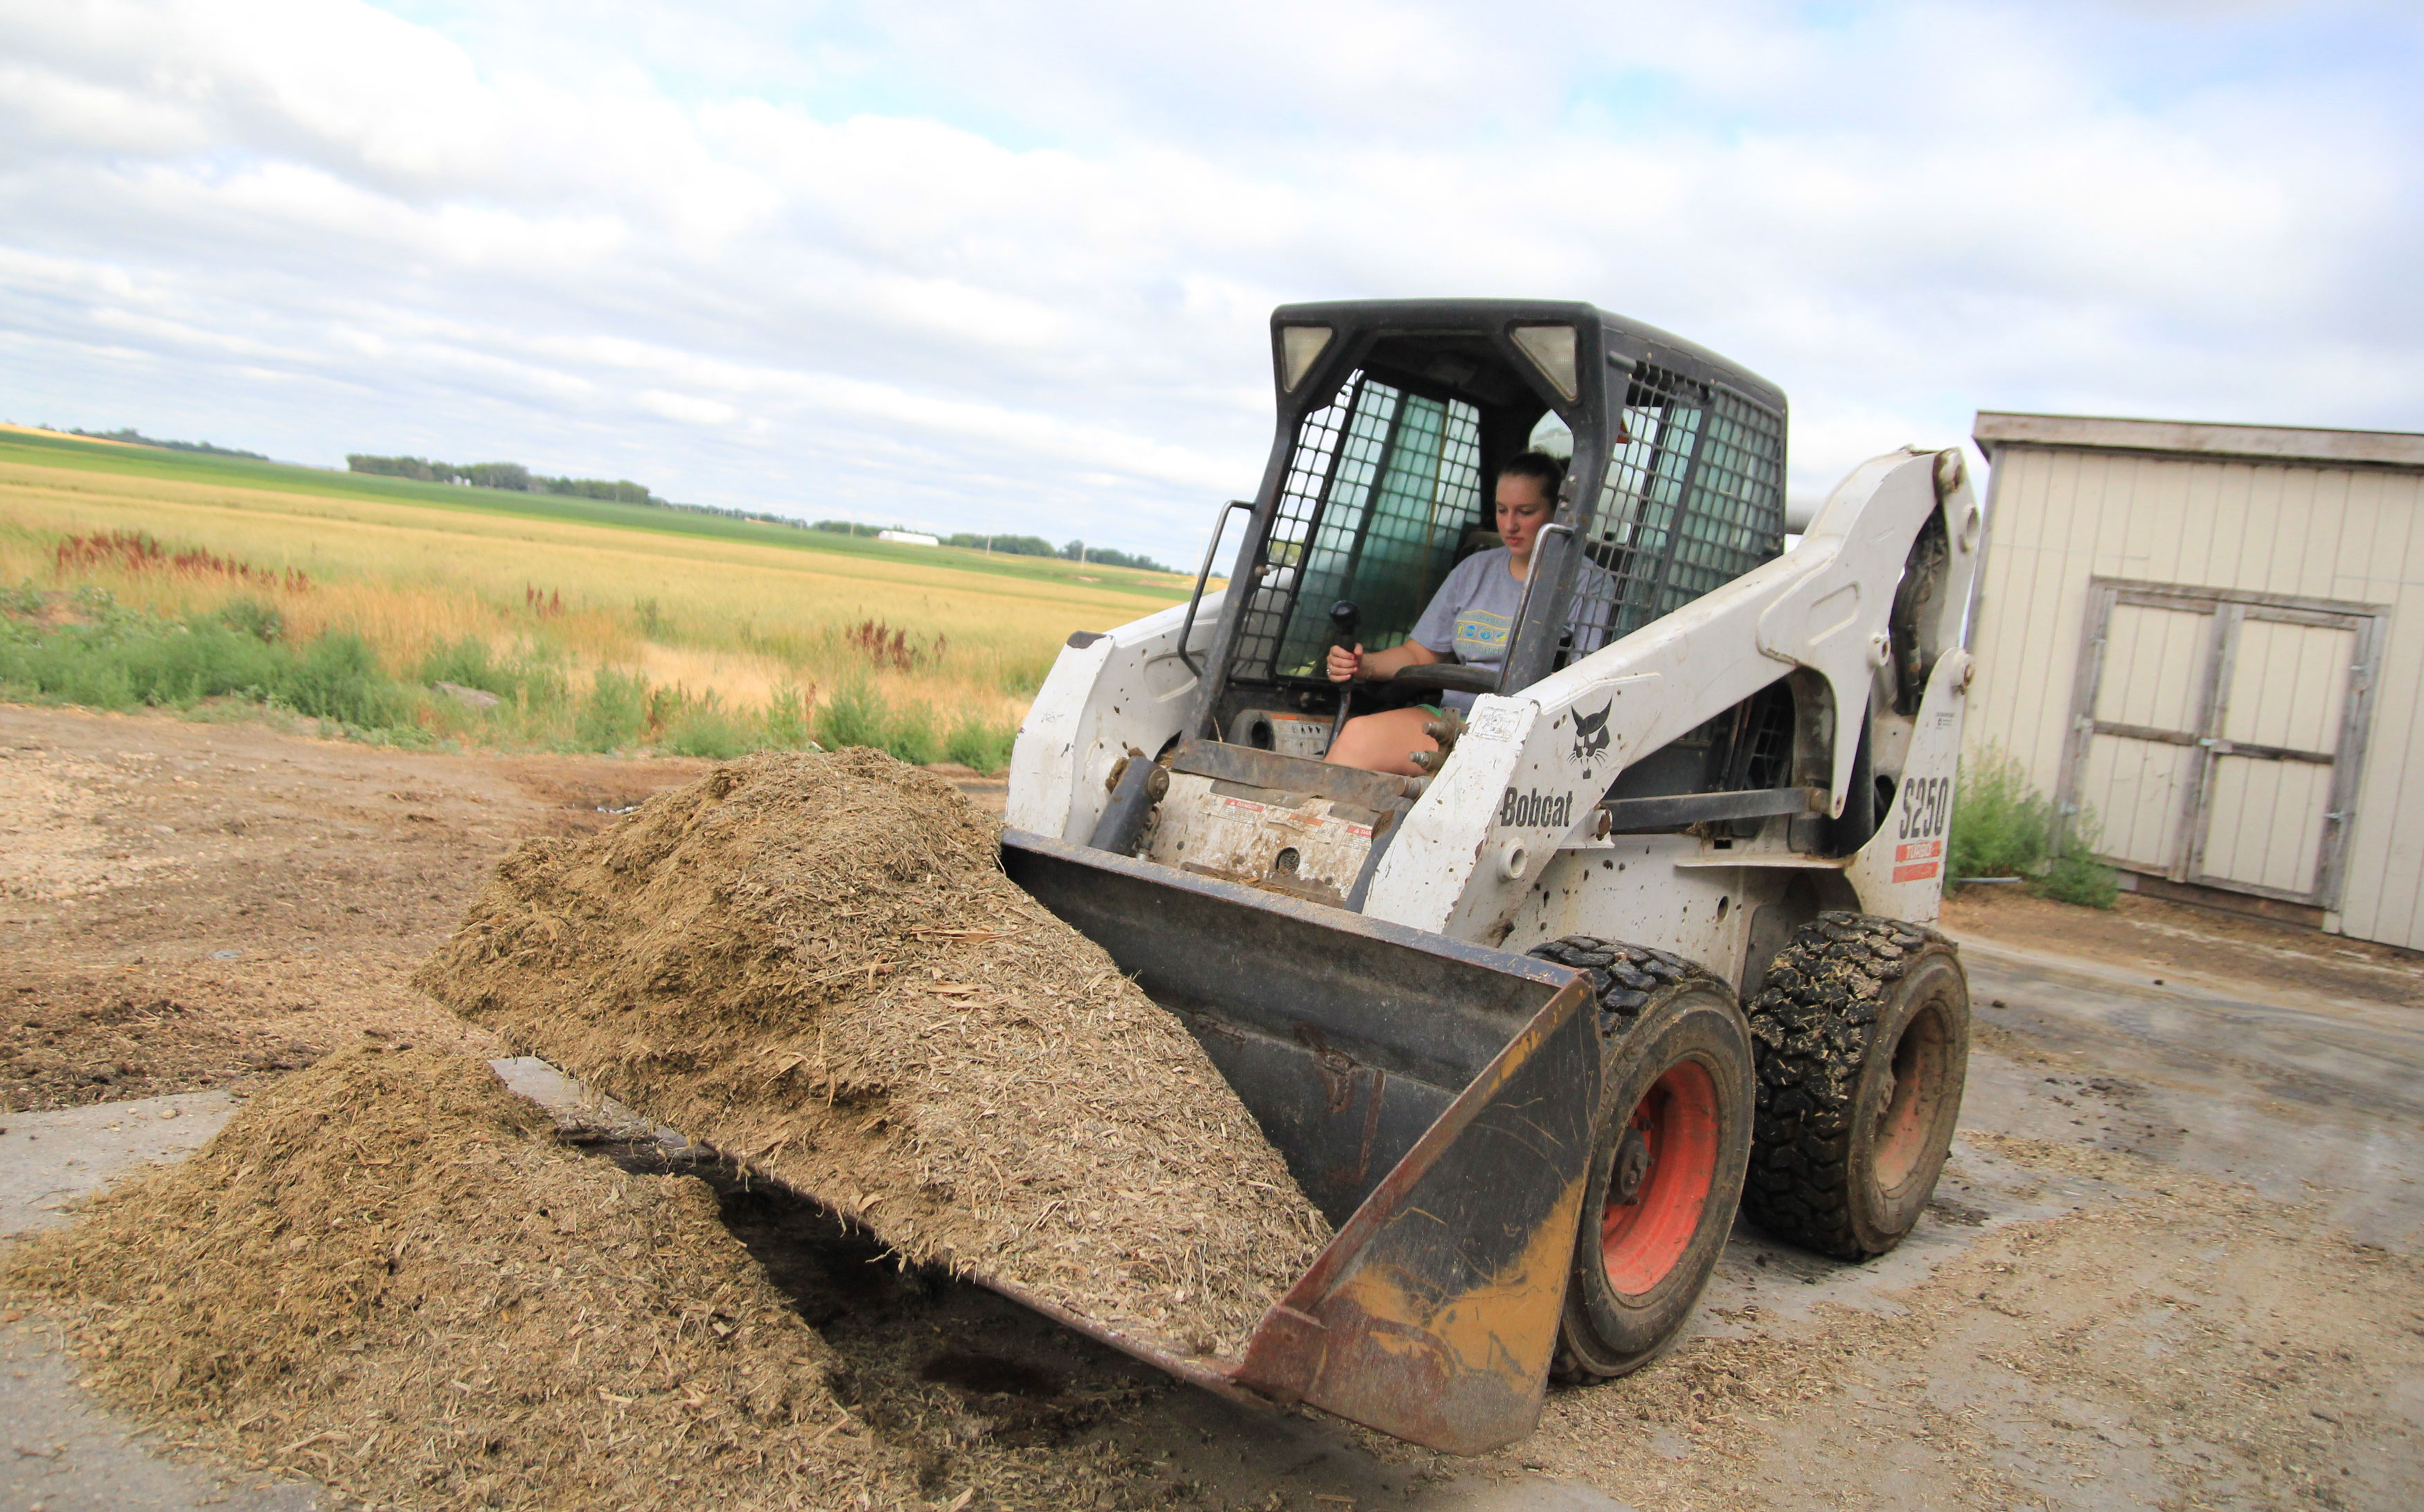 Female dairy employee operating a skid-steer carrying a load of feed in the bucket.